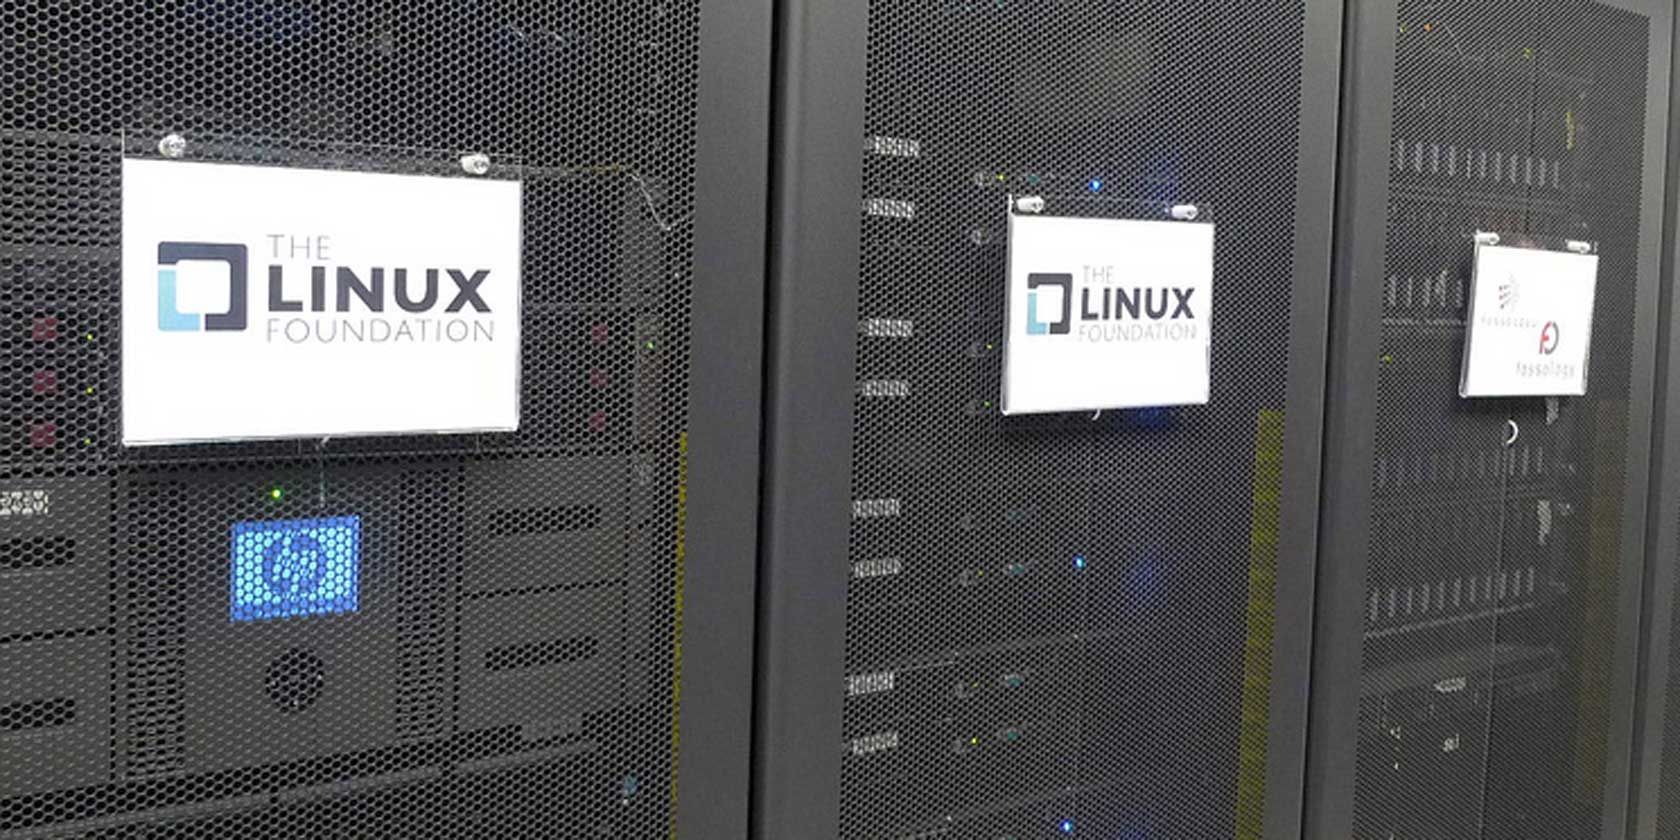 MakeUseOfOpen For All: Linux Foundation & edX Launch Course For Learning Linux